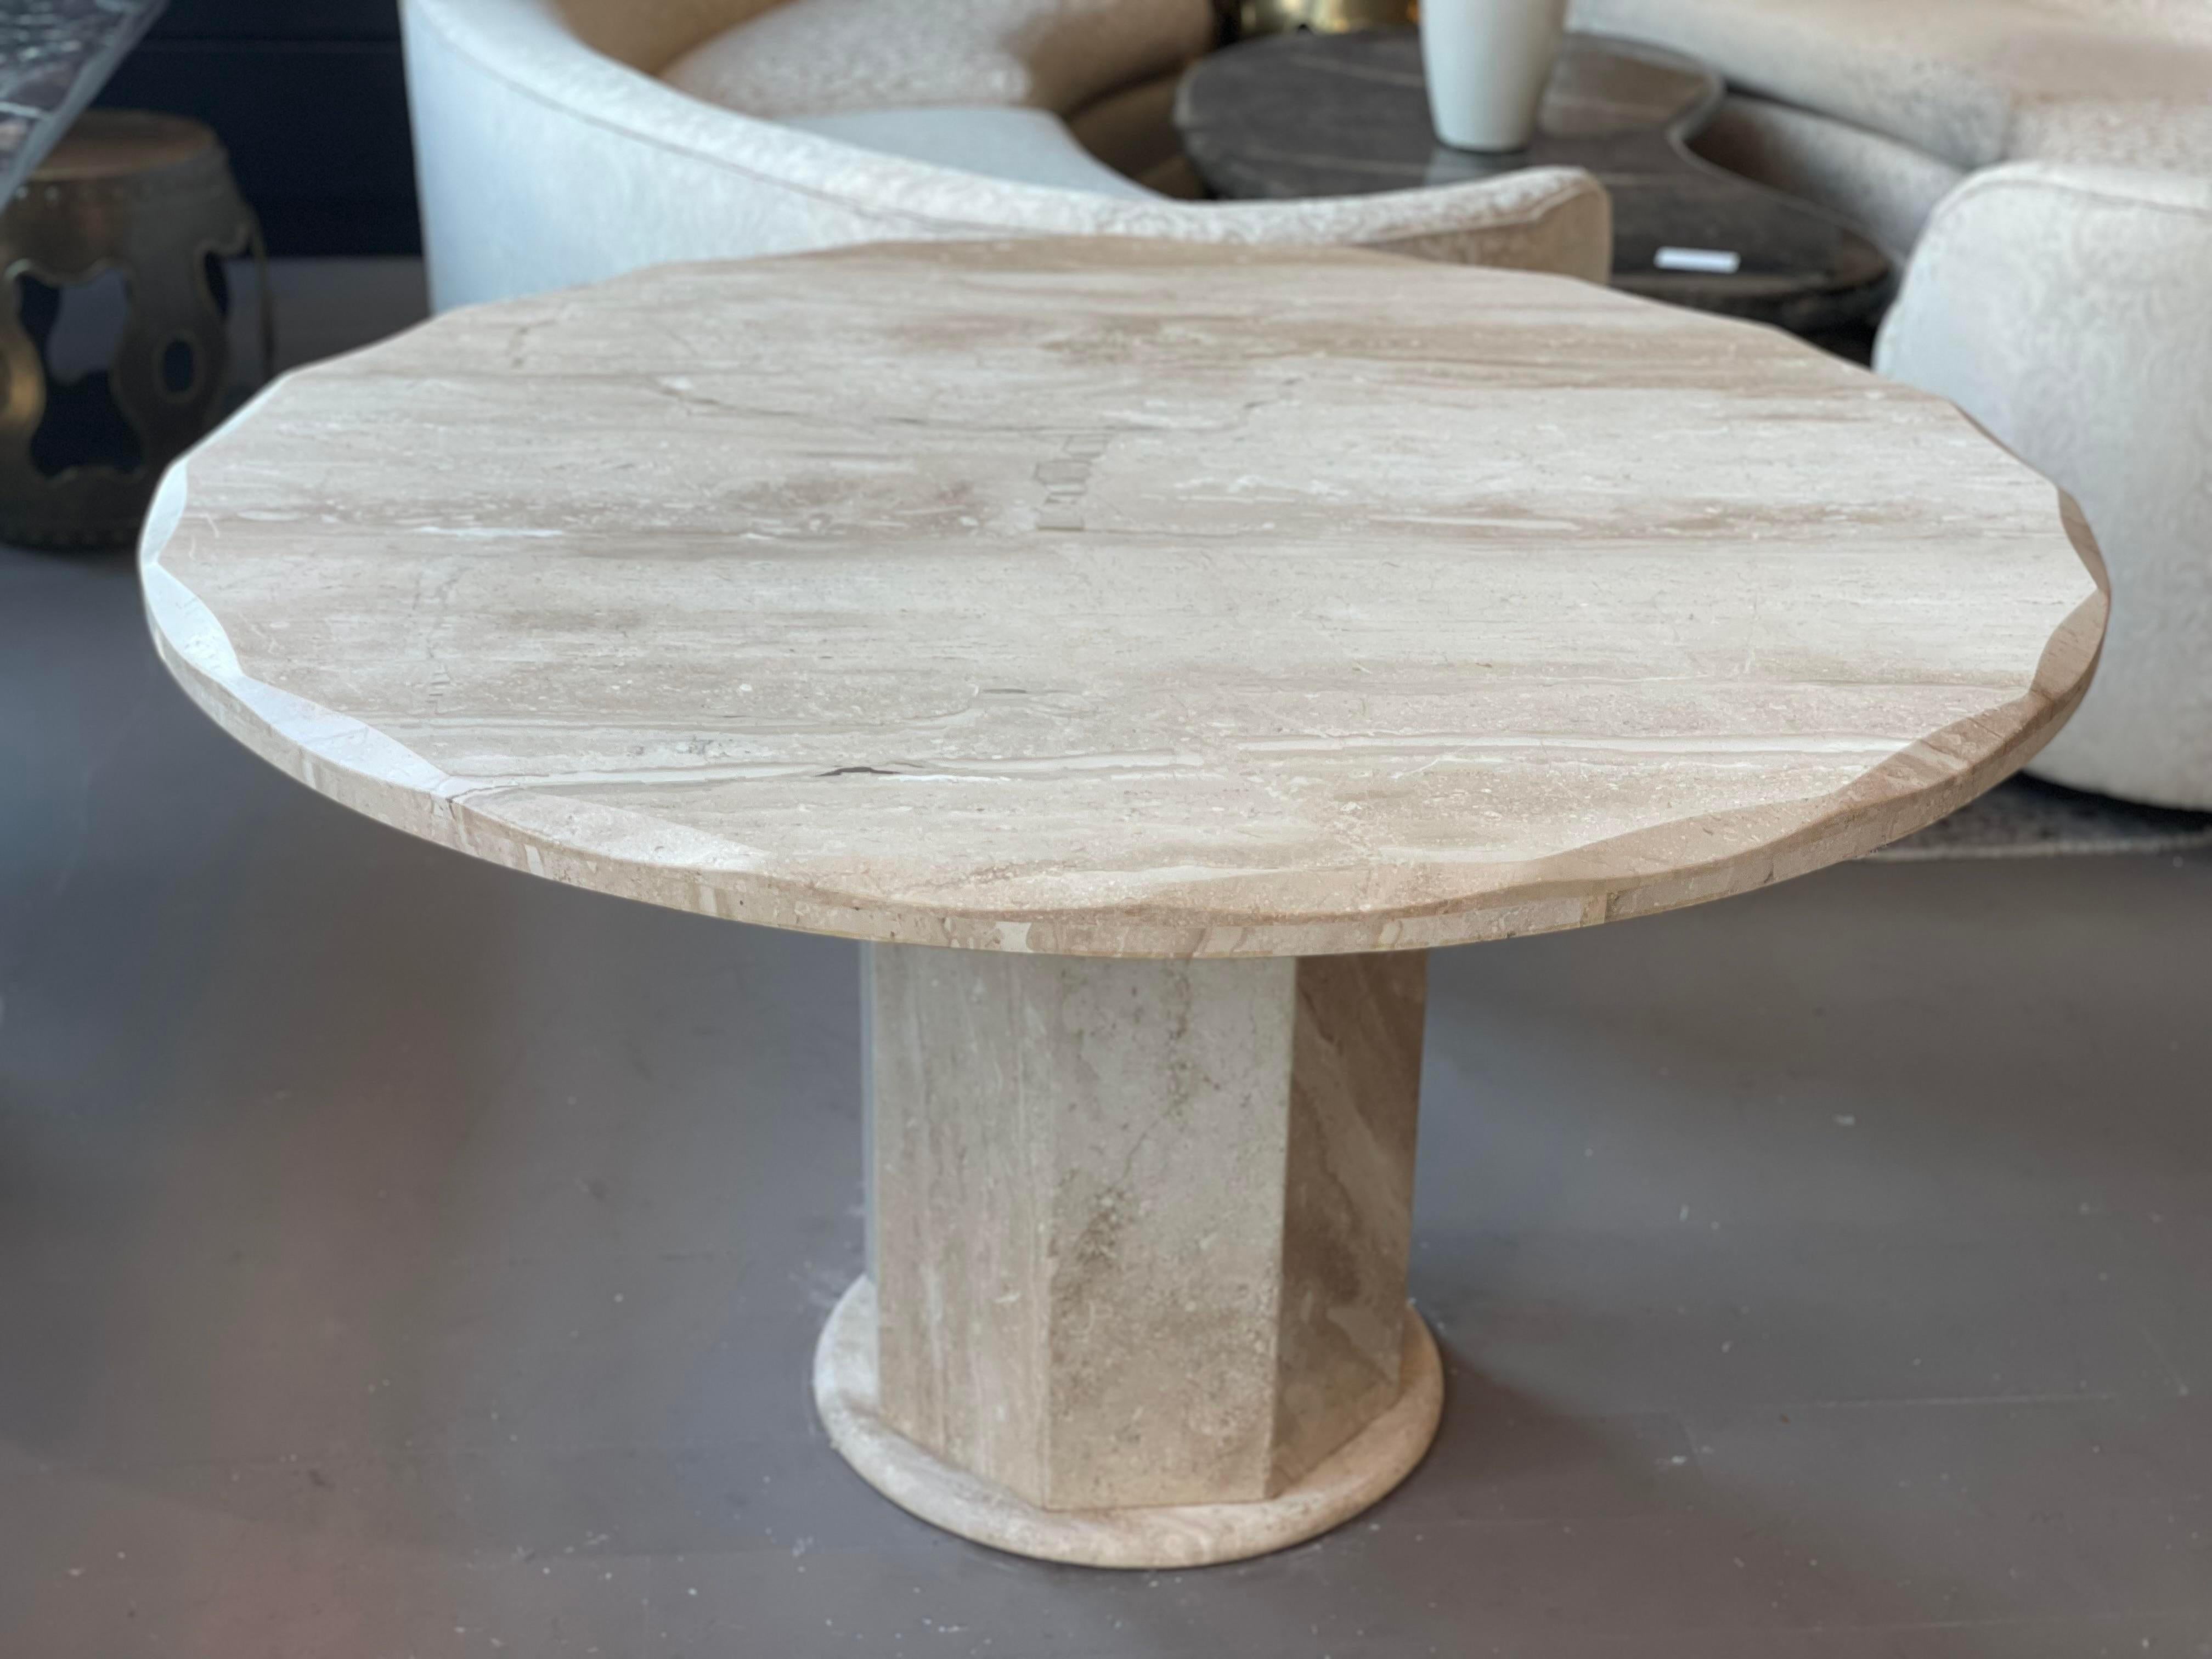 1980s Travertine Scalloped Edge Postmodern Dining Table For Sale 4